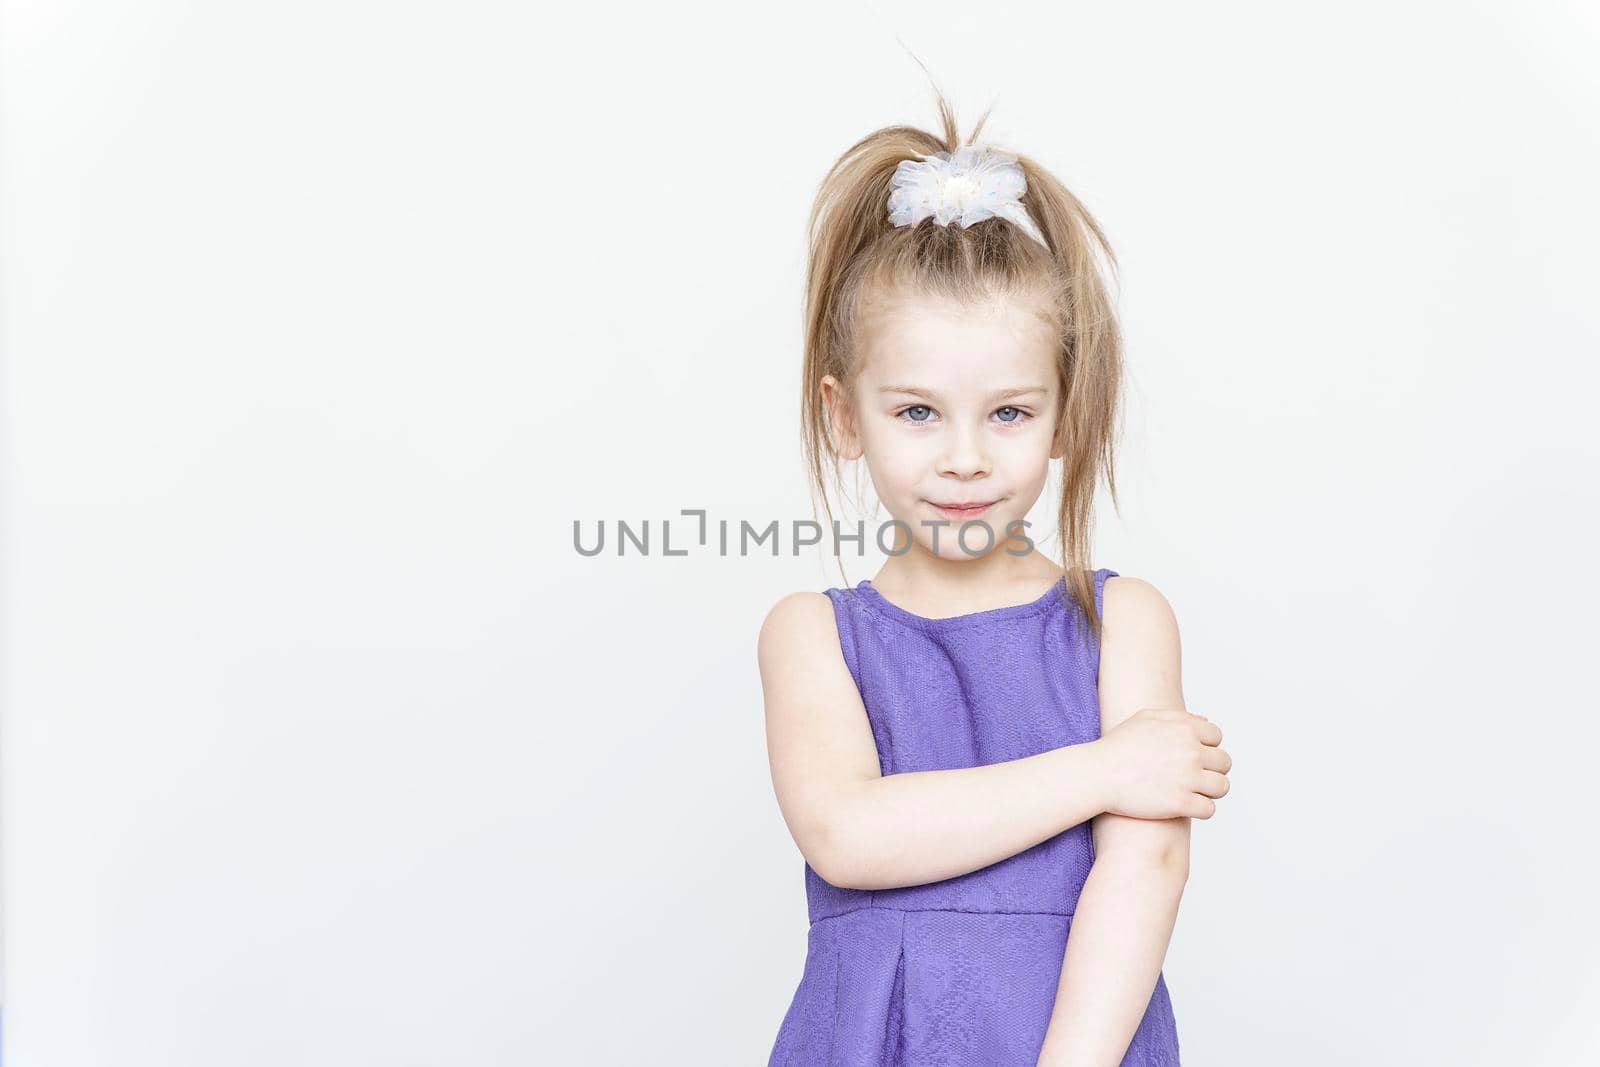 portrait of a cute 5 year old girl on a light background